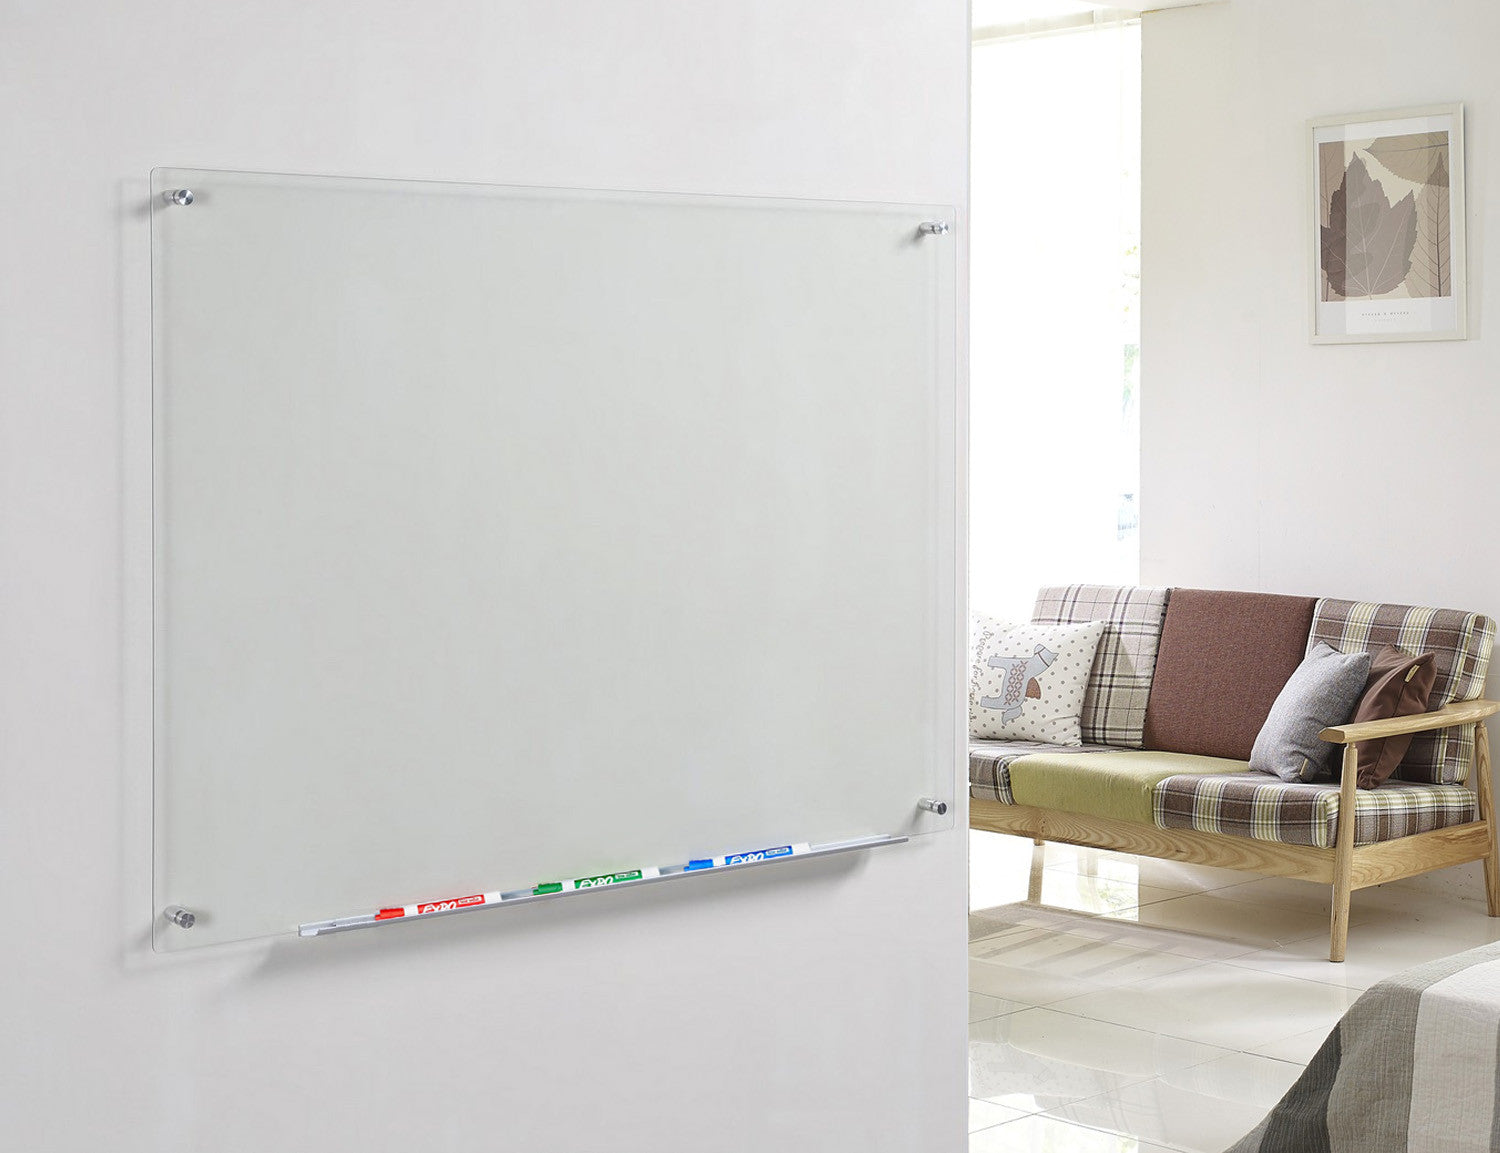 Clear Glass Dry-Erase Board with Aluminum Marker Tray. Wall mounted in a living room as a chore board. 